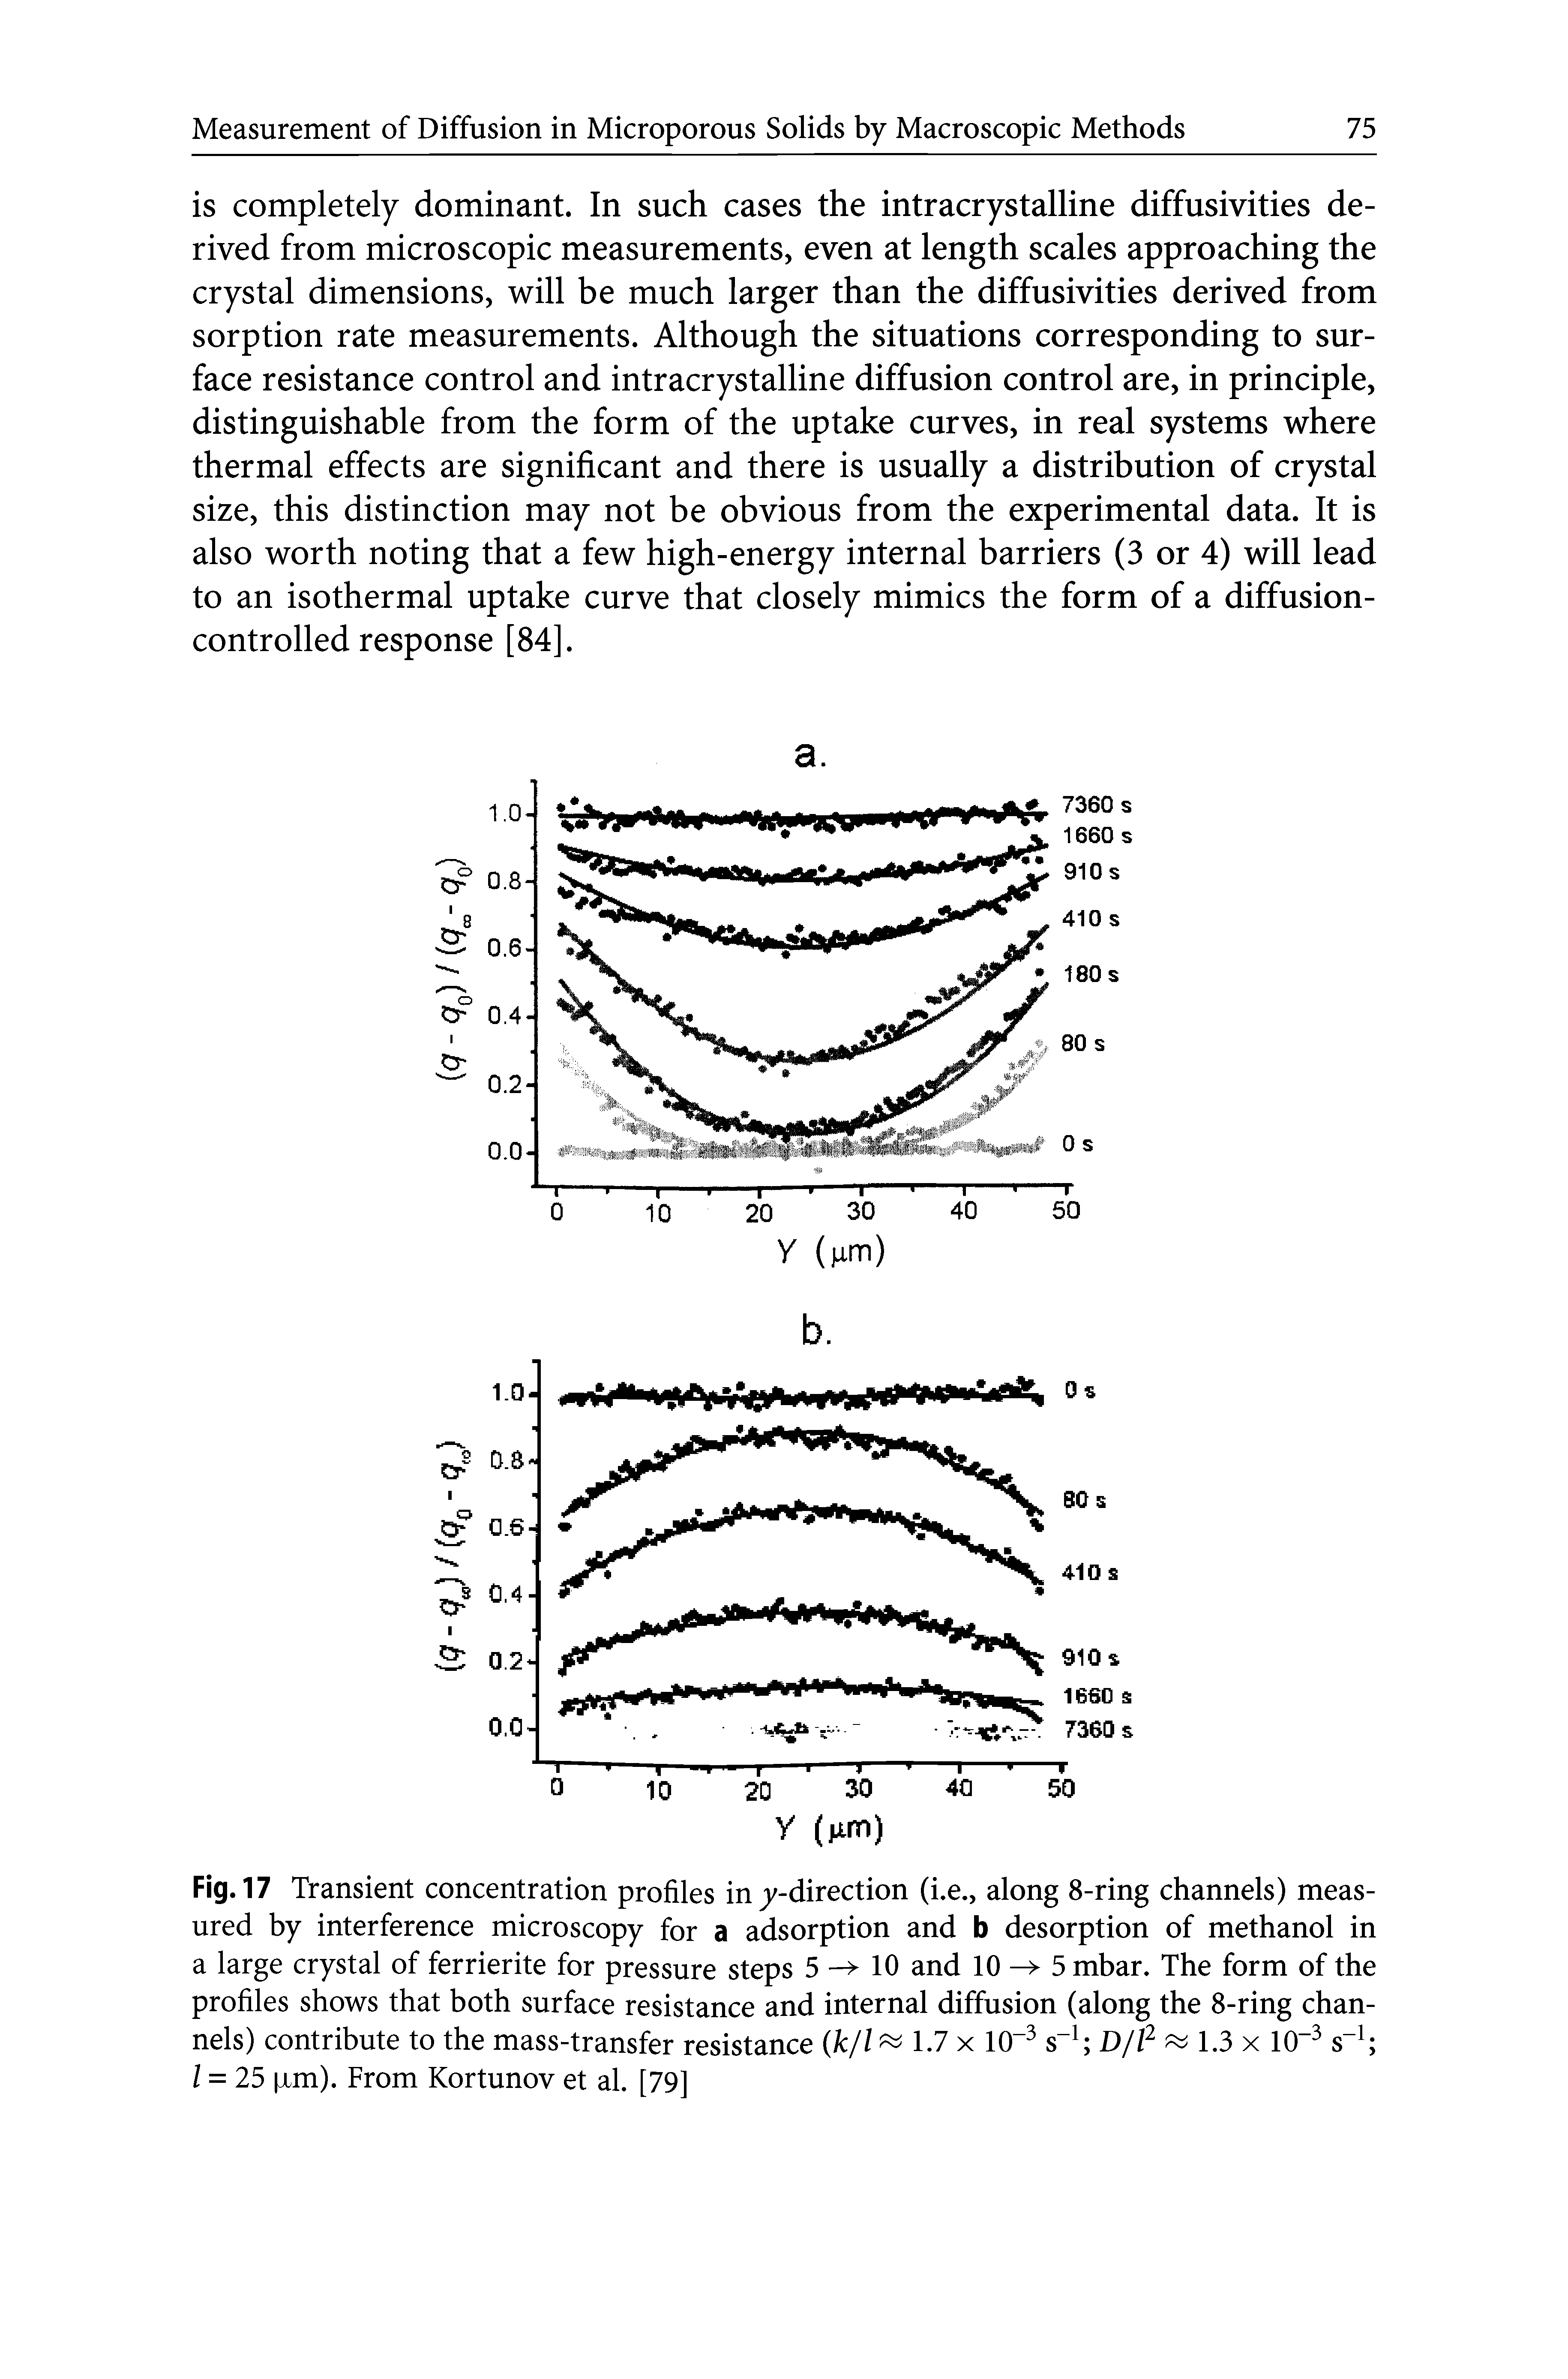 Fig. 17 Transient concentration profiles in y-direction (i.e., along 8-ring channels) measured by interference microscopy for a adsorption and b desorption of methanol in a large crystal of ferrierite for pressure steps 5 -> 10 and 10 5 mbar. The form of the profiles shows that both surface resistance and internal diffusion (along the 8-ring chan-...